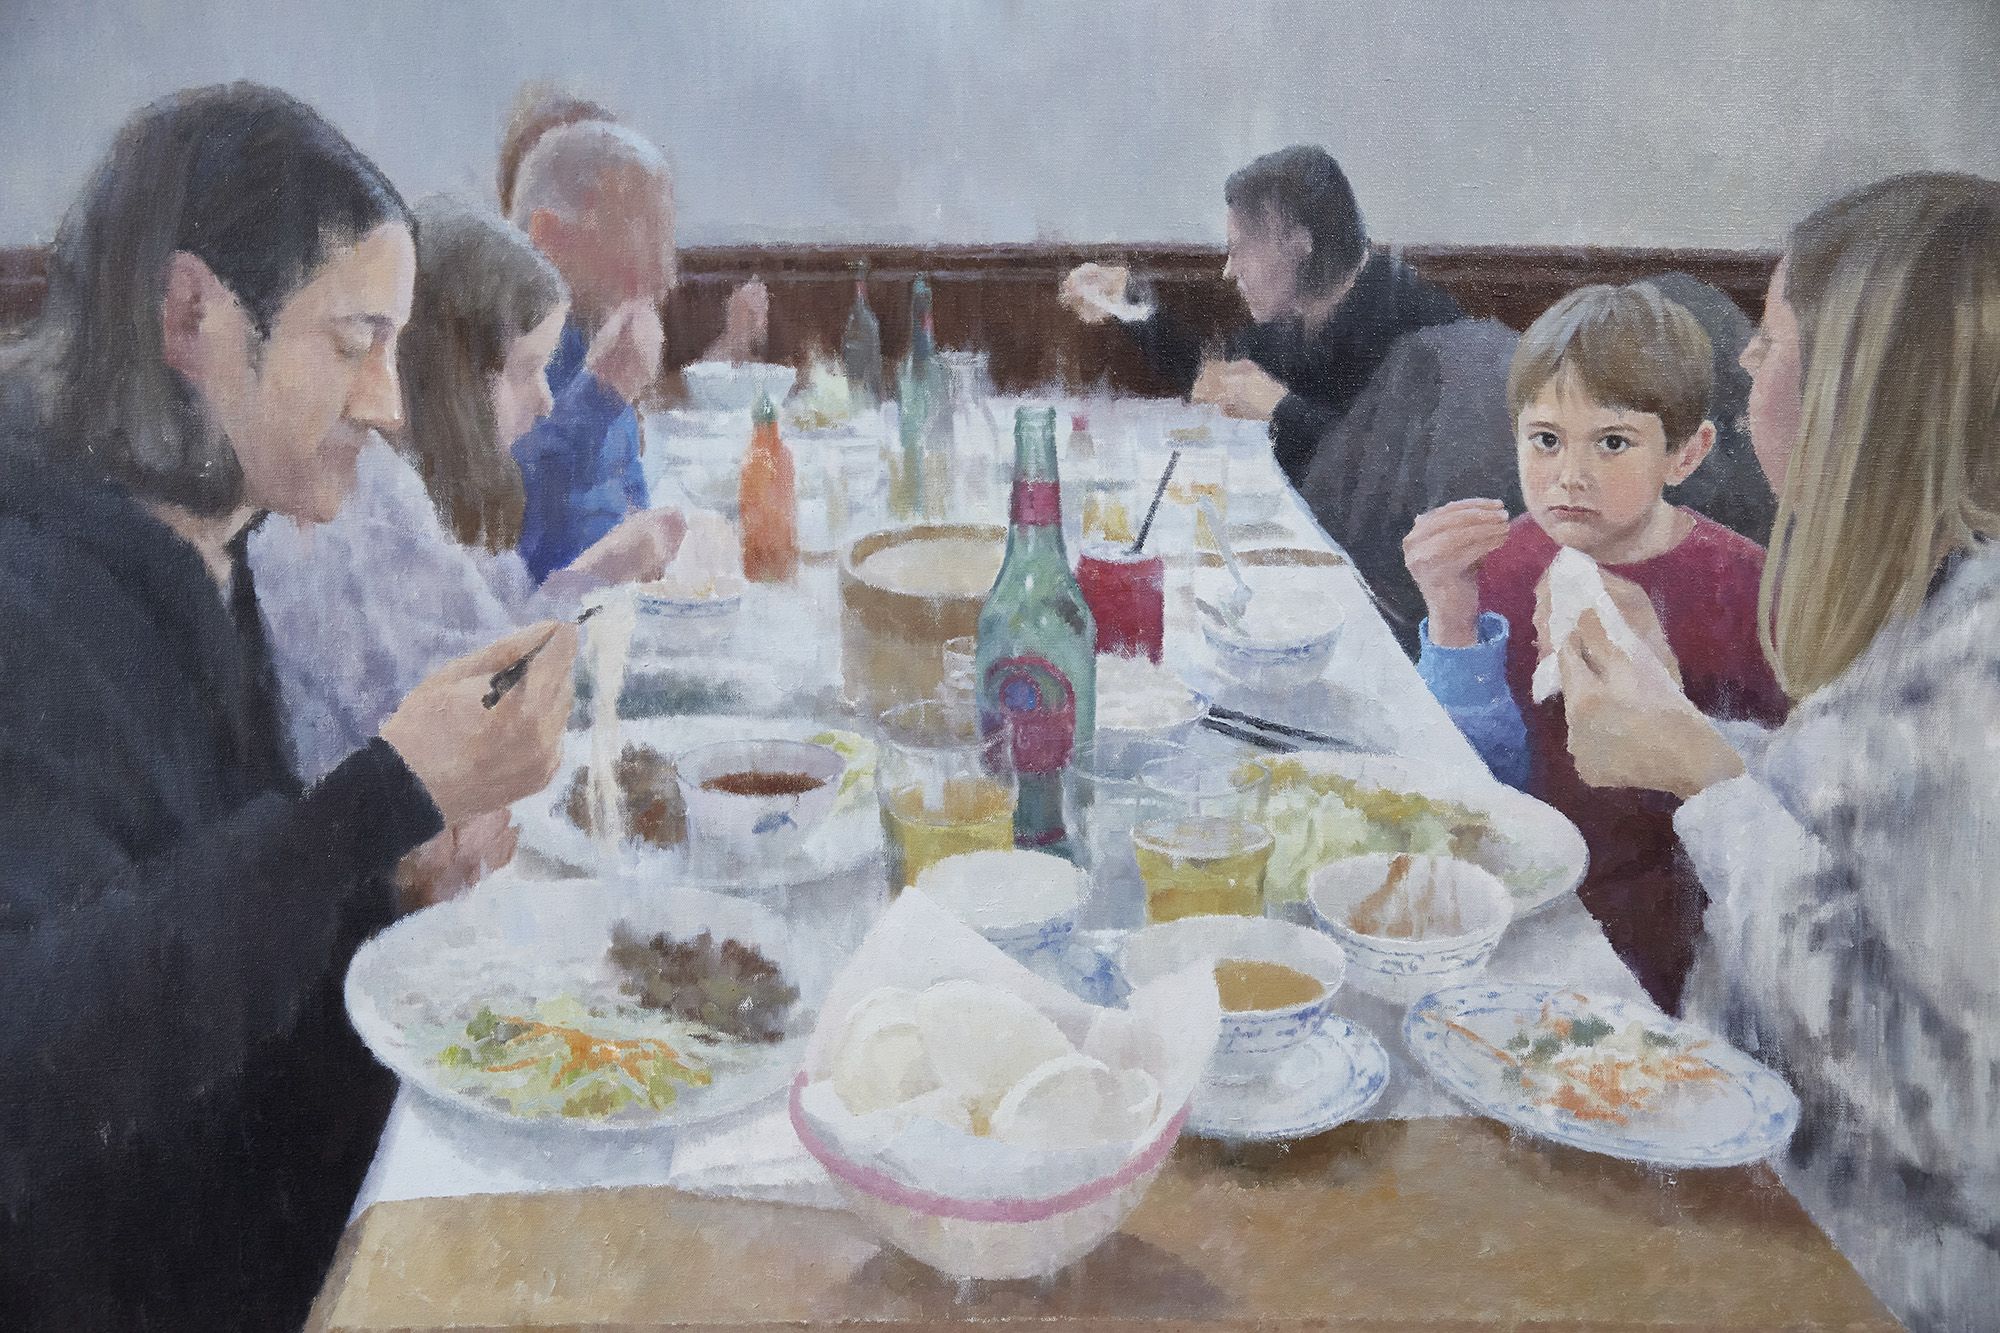 A painting of a group of people eating a meal at a table in a restaurant, a young boy is looking out at the viewer. 